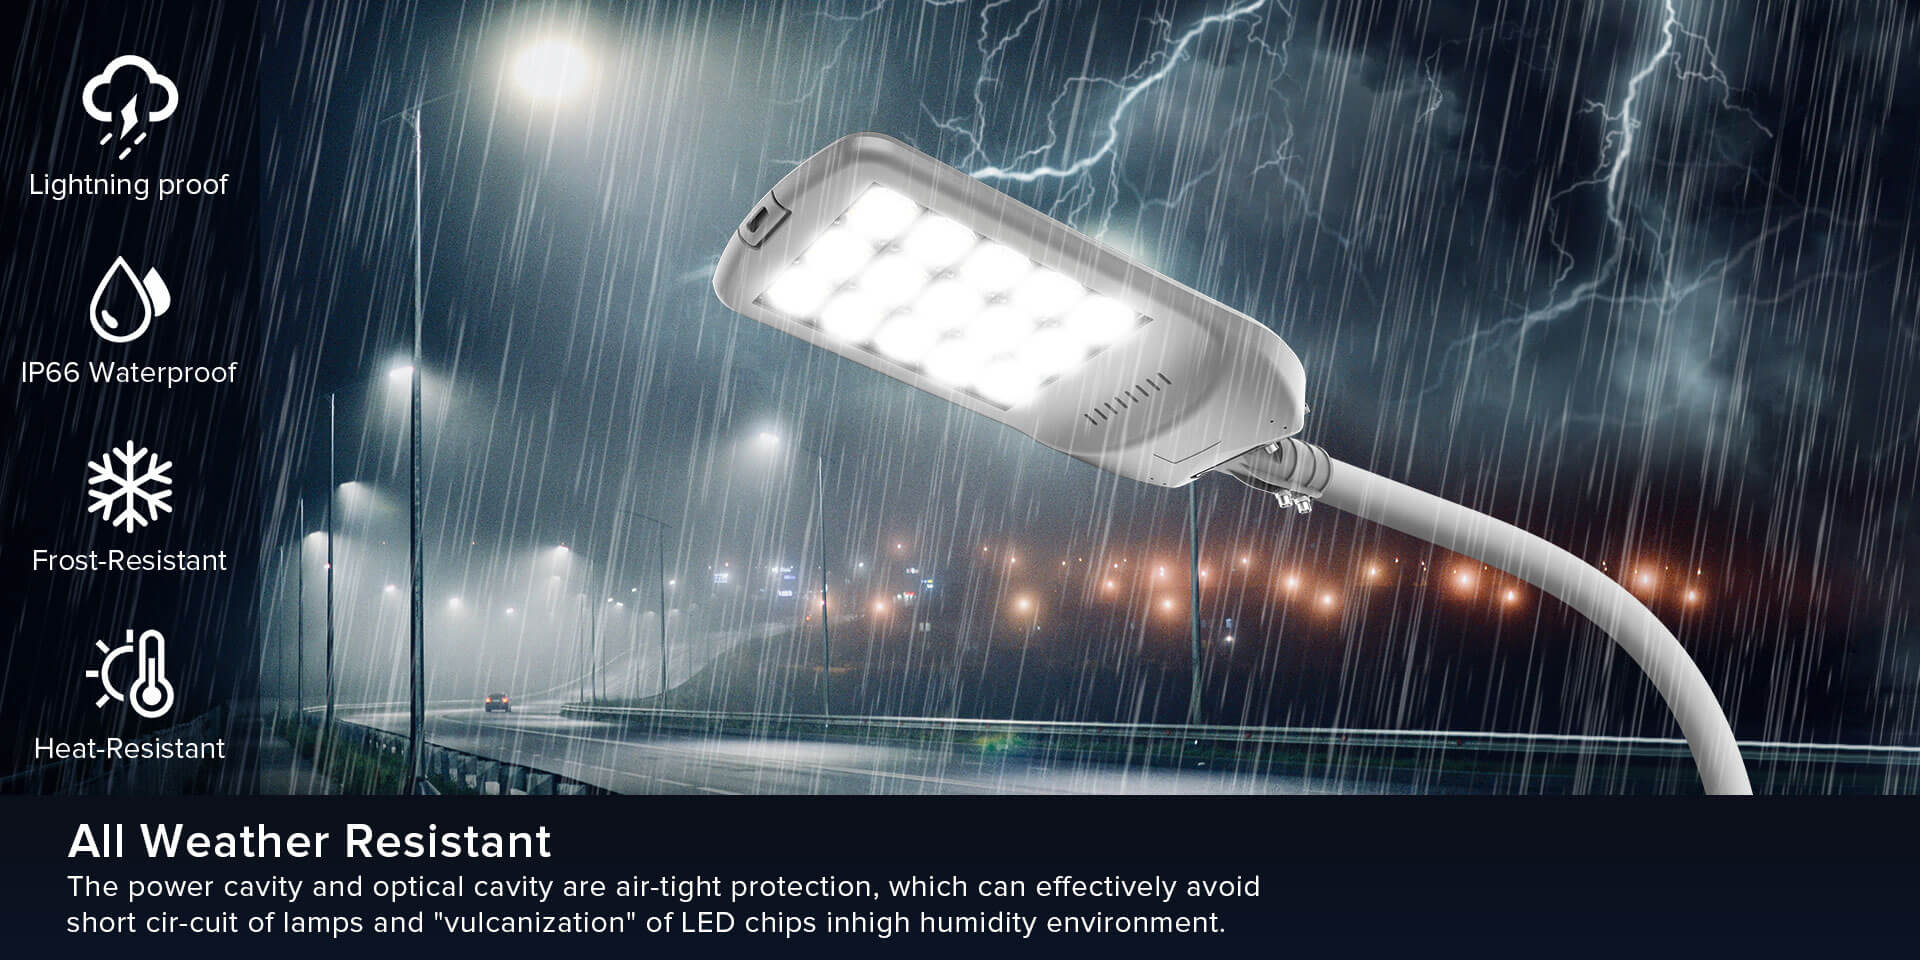 All Weather Resistant: The power cavity and optical cavity are air tight protection, which can effectively avoidshort cir-cuit of lamps and "vulcanization" of LED chips inhigh humidity environment.